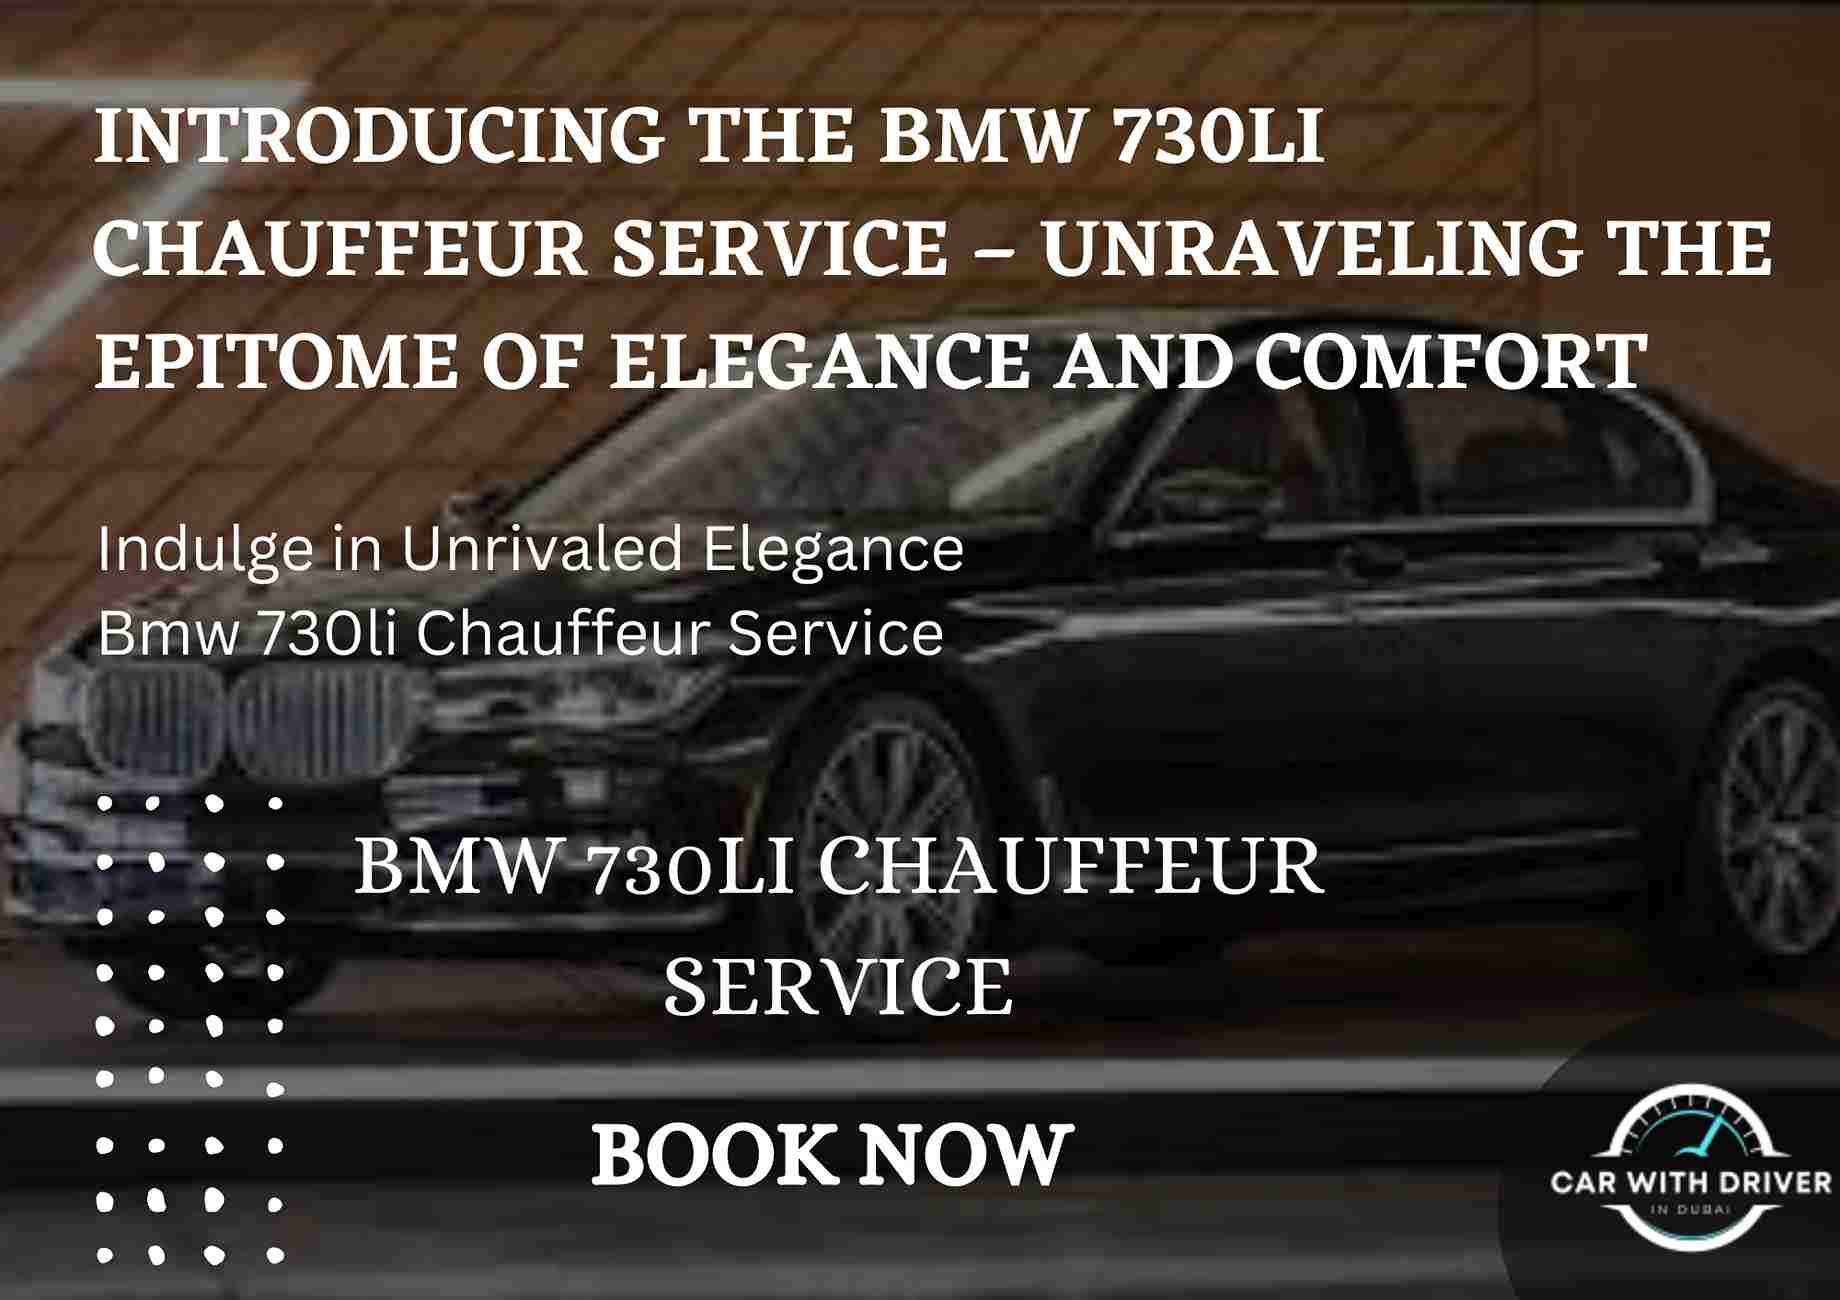 You are currently viewing INTRODUCING THE BMW 730LI CHAUFFEUR SERVICE – UNRAVELING THE EPITOME OF ELEGANCE AND COMFORT